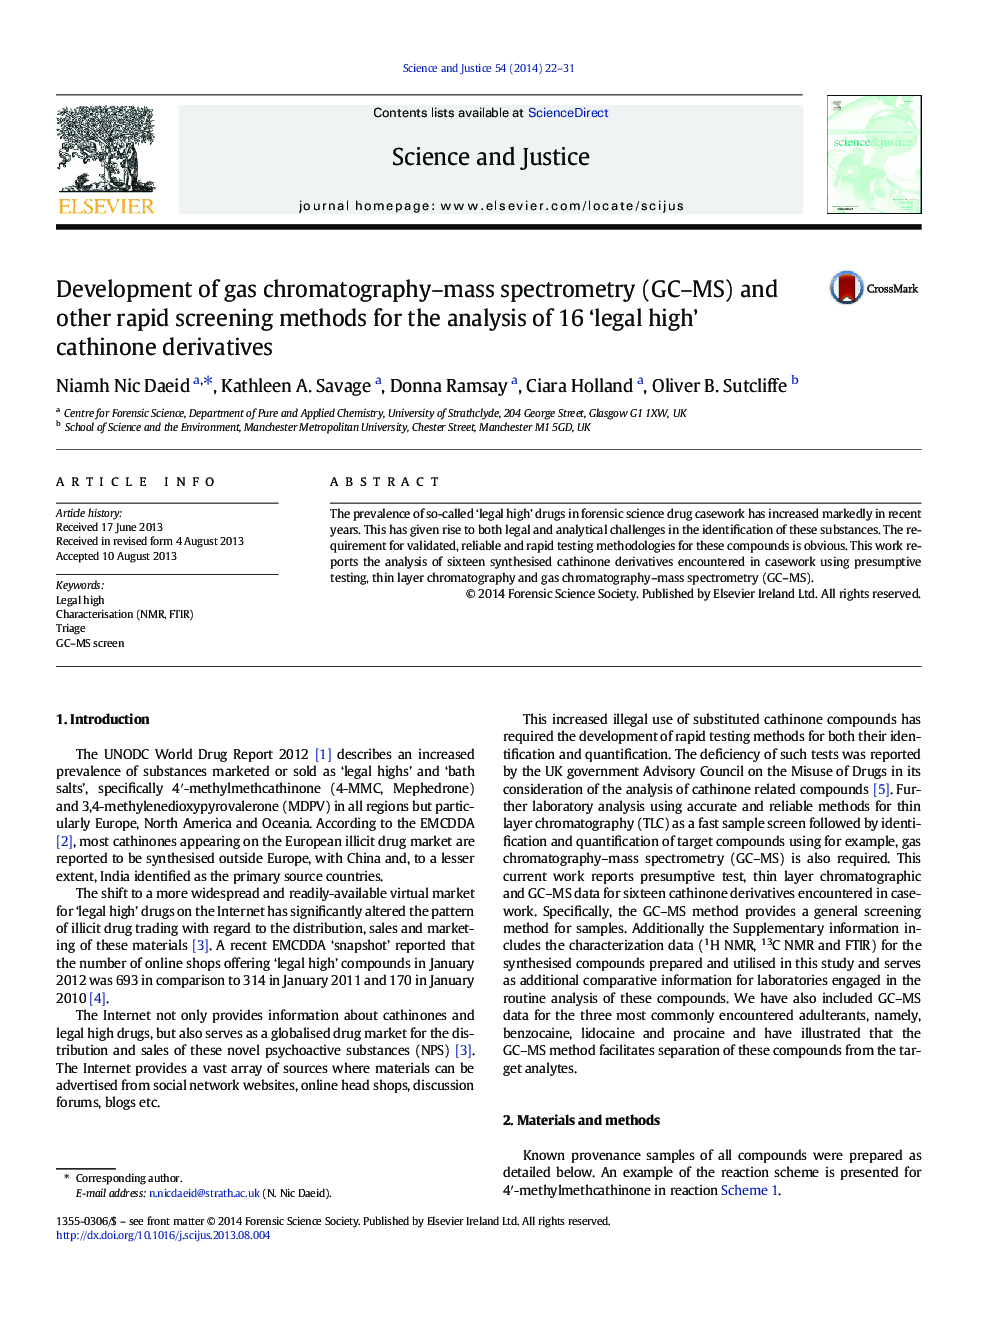 Development of gas chromatography-mass spectrometry (GC-MS) and other rapid screening methods for the analysis of 16 'legal high' cathinone derivatives